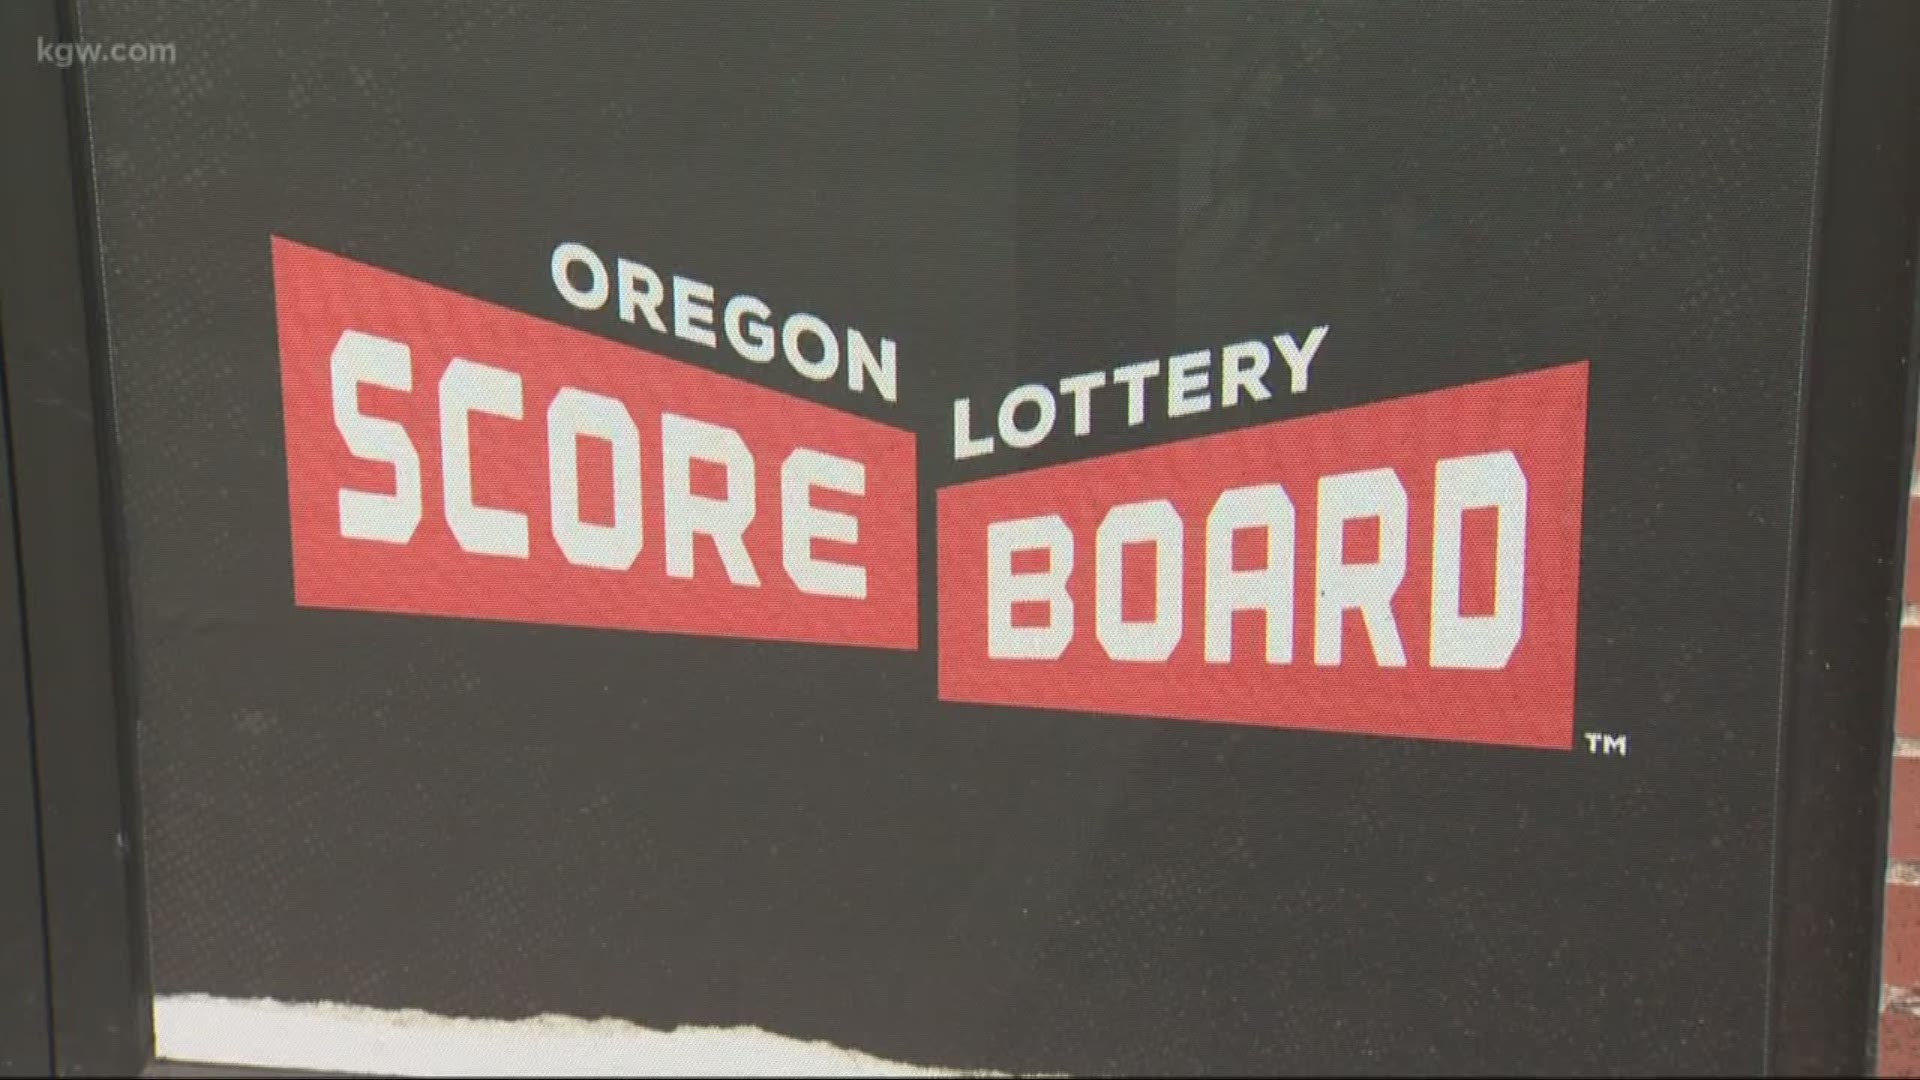 The state of Oregon its chance to cash in on the Super Bowl betting frenzy with the Scoreboard app from Oregon Lottery.